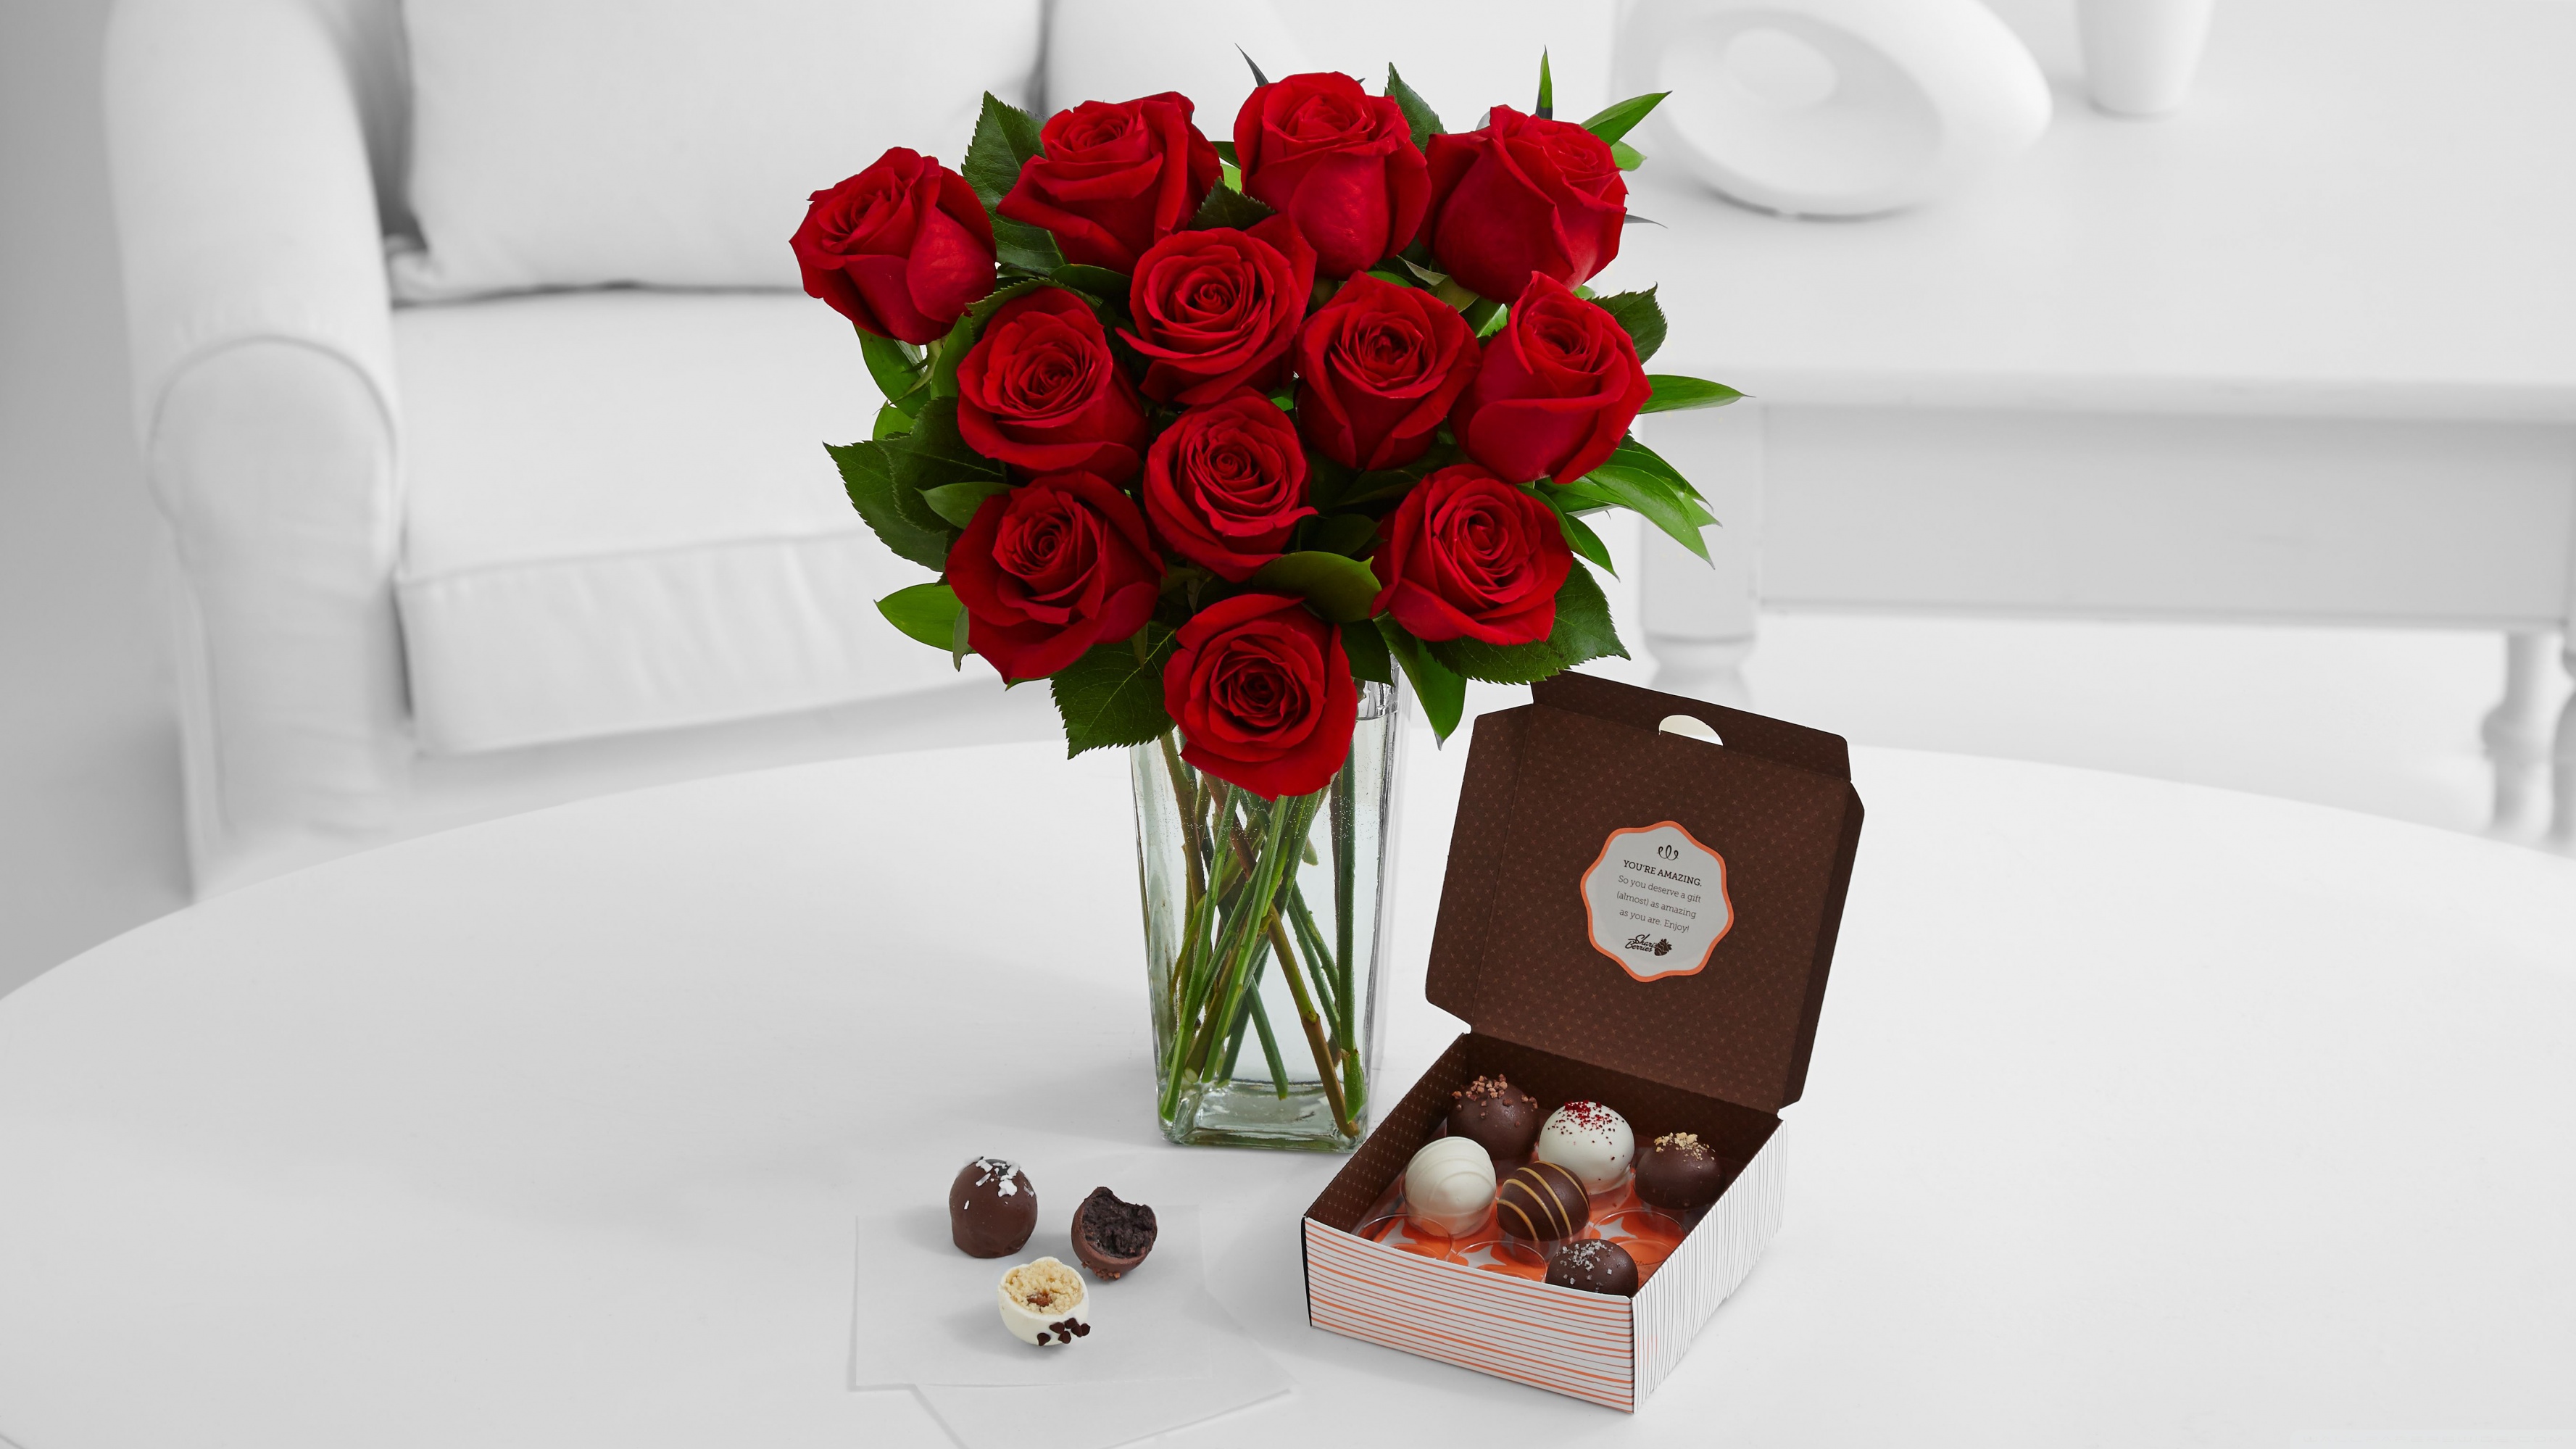 Cake Truffles and Red Roses Bouquet